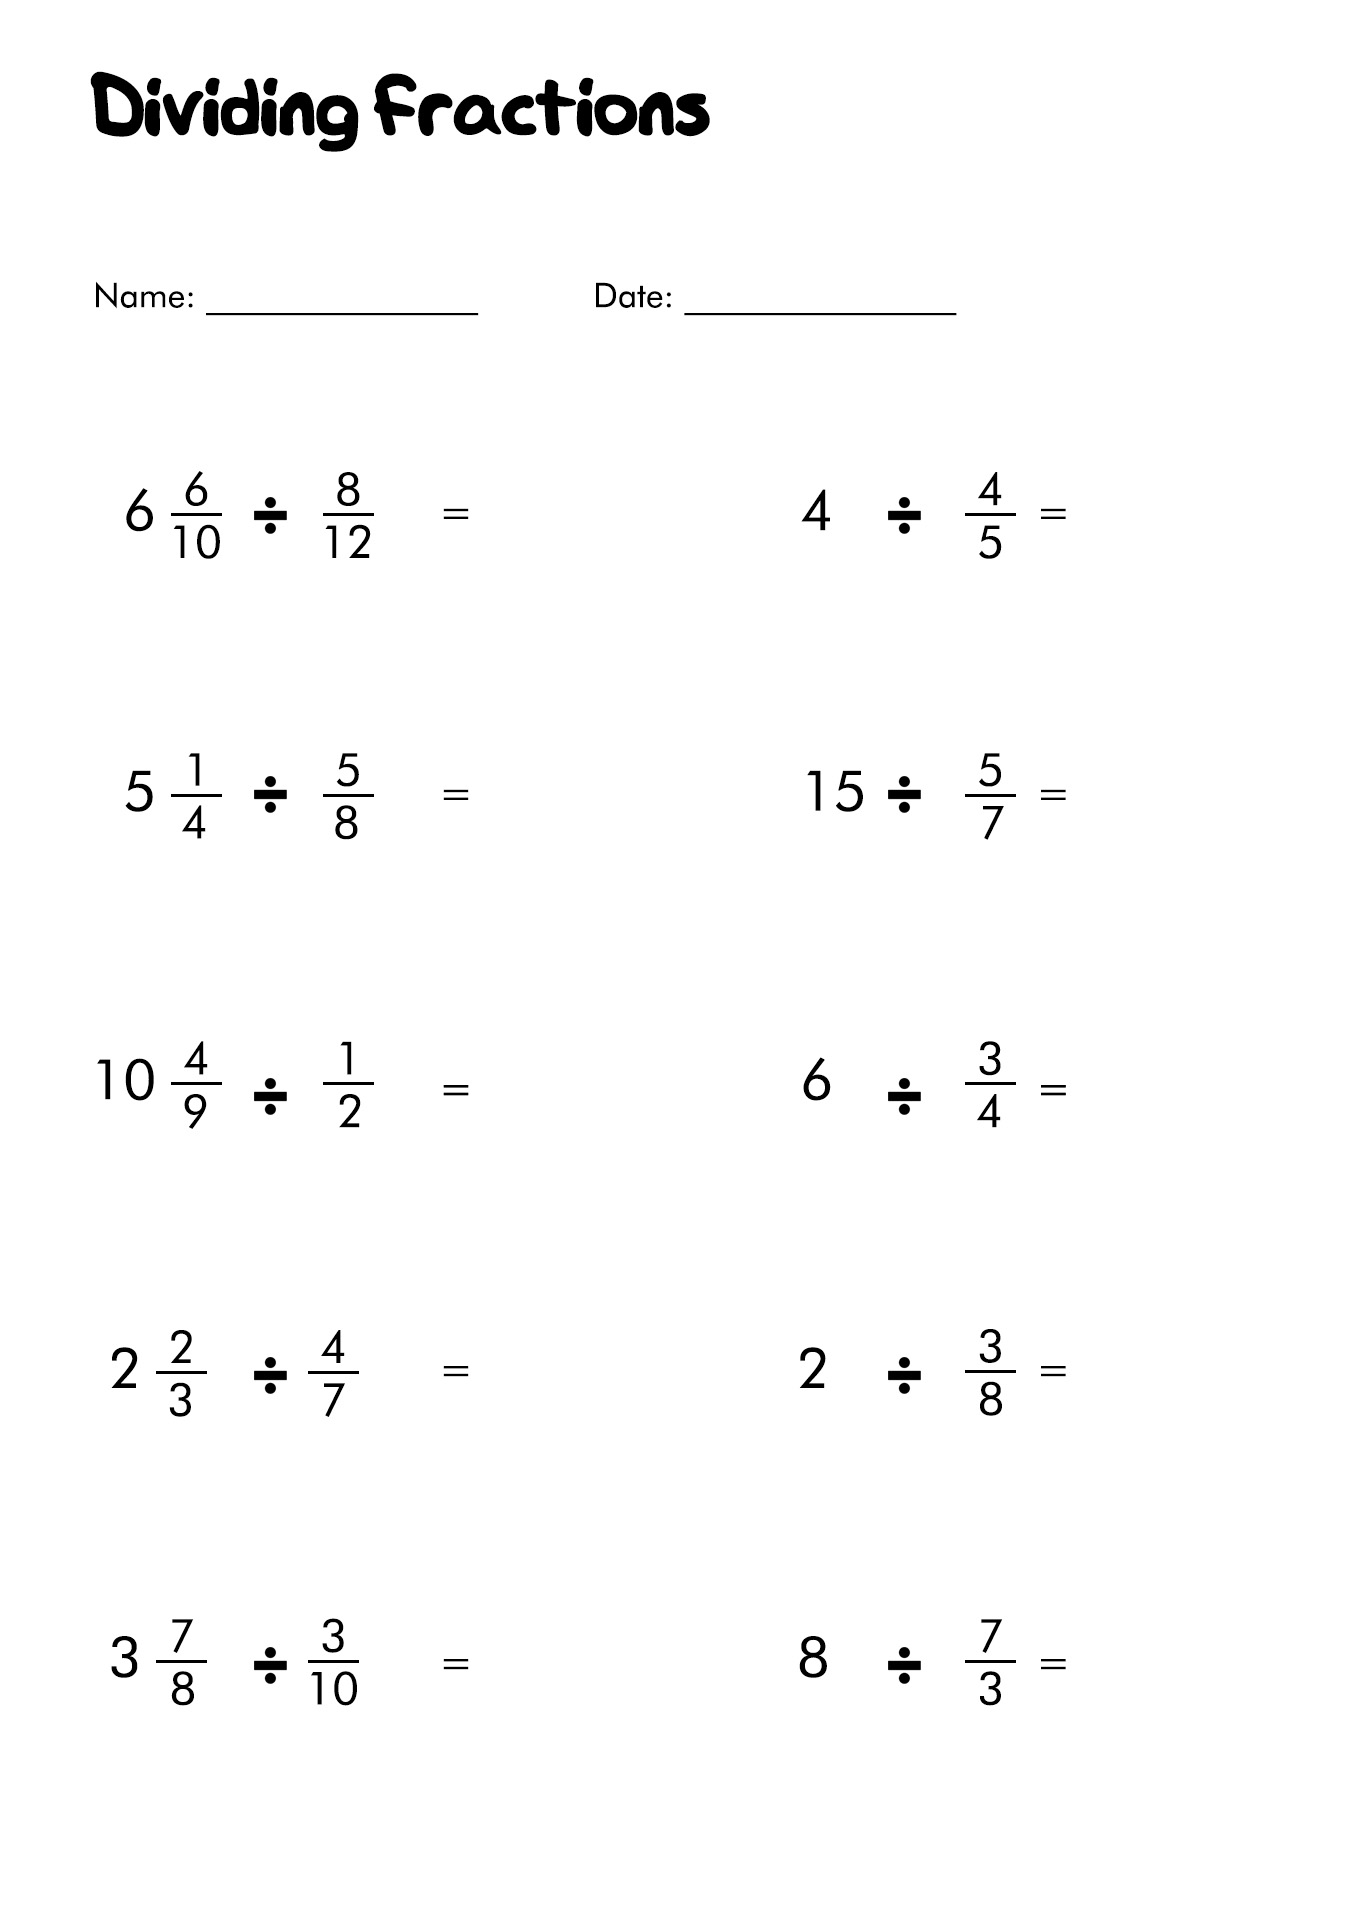 Dividing Fractions with Whole Numbers Worksheets Image